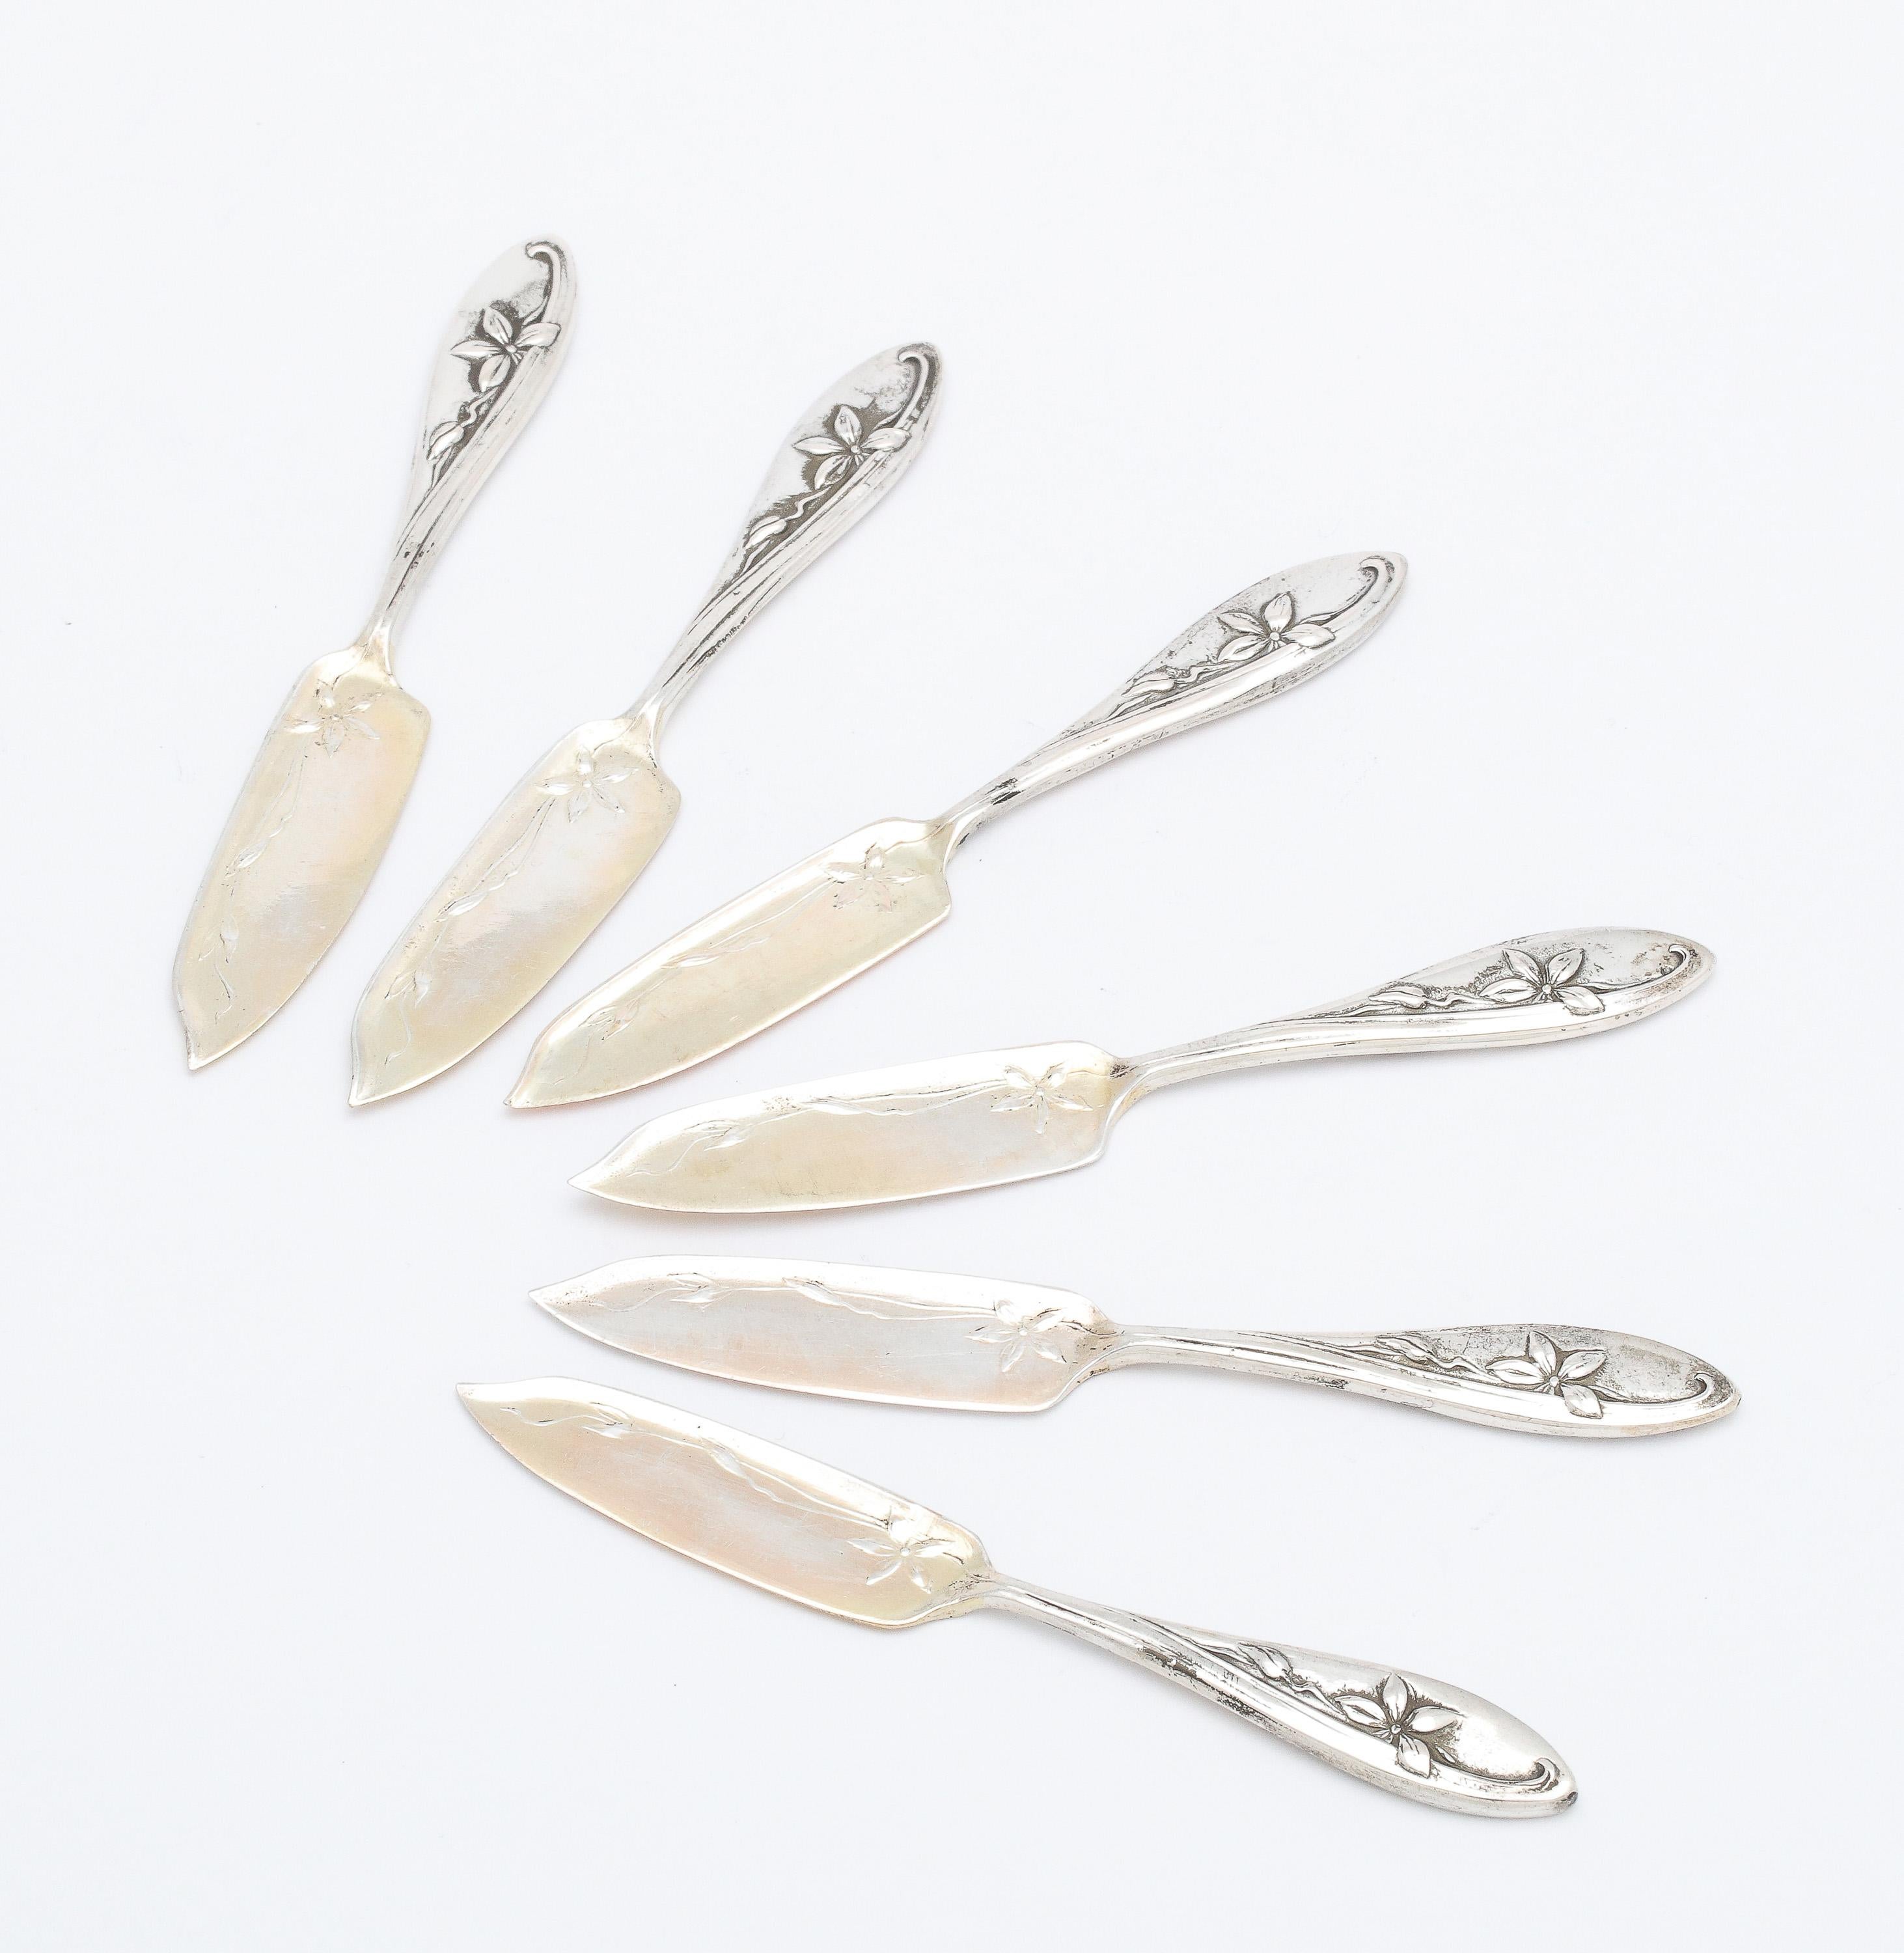 Set of  six, Art Nouveau, Continental Silver (.800) caviar/hors d' oeuvres spreaders, Germany, Ca. 1895-1910. Both sides of spreading surface are rose-gold gilded. Decorated with Art Nouveau lilies whose stems whip around the front and back of each